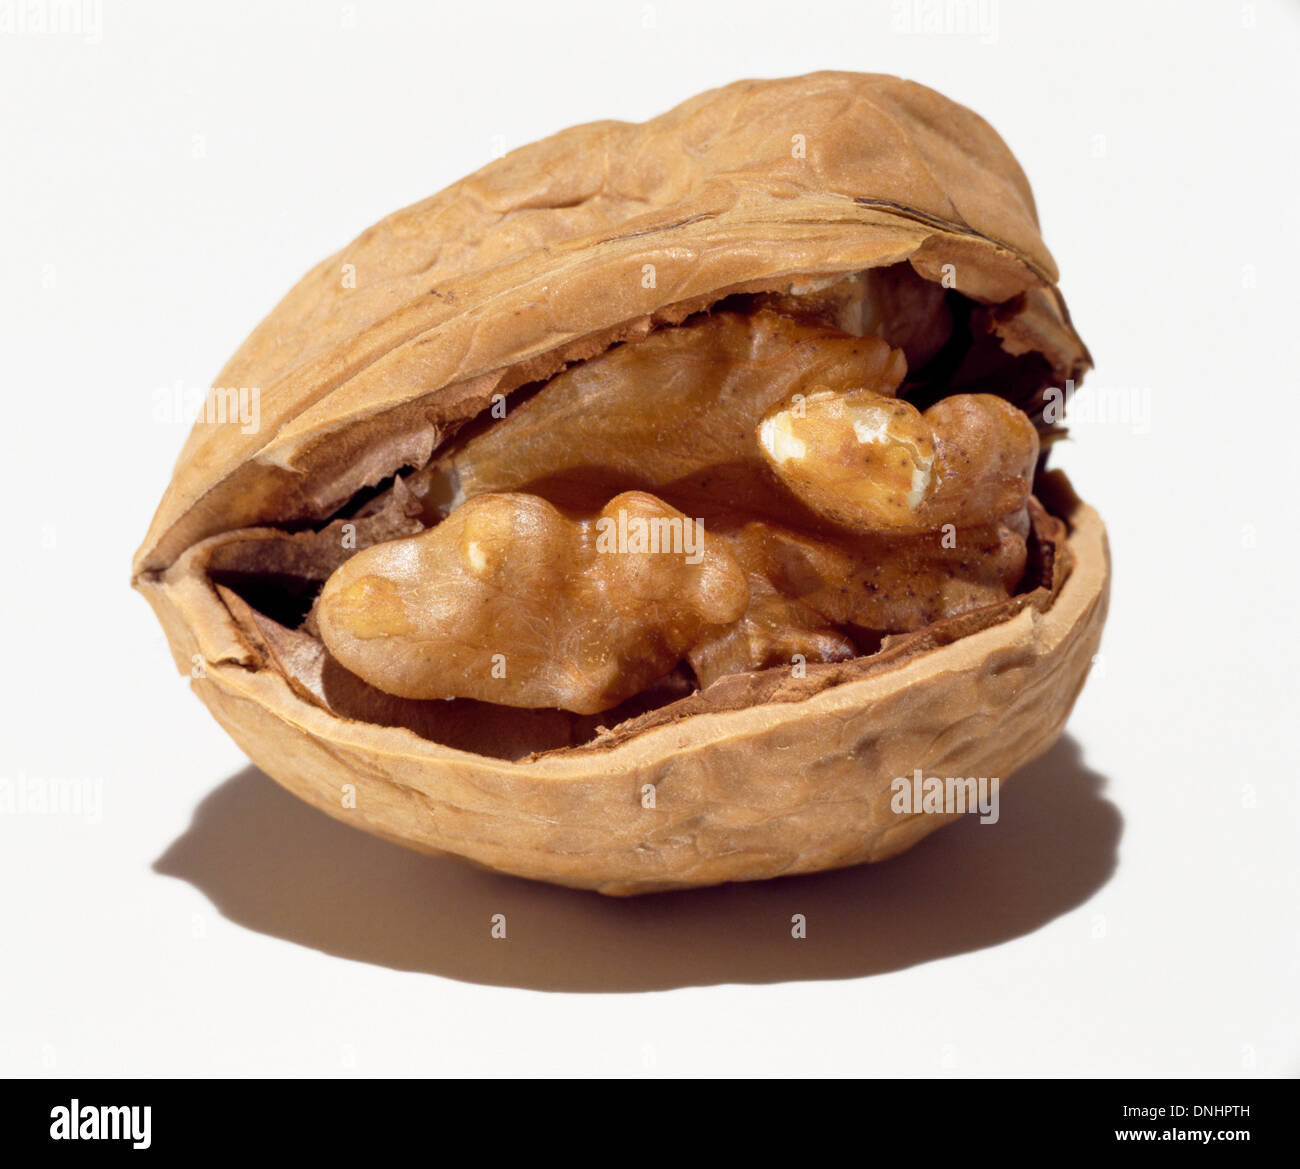 A half opened walnut and shell on a white background. Stock Photo